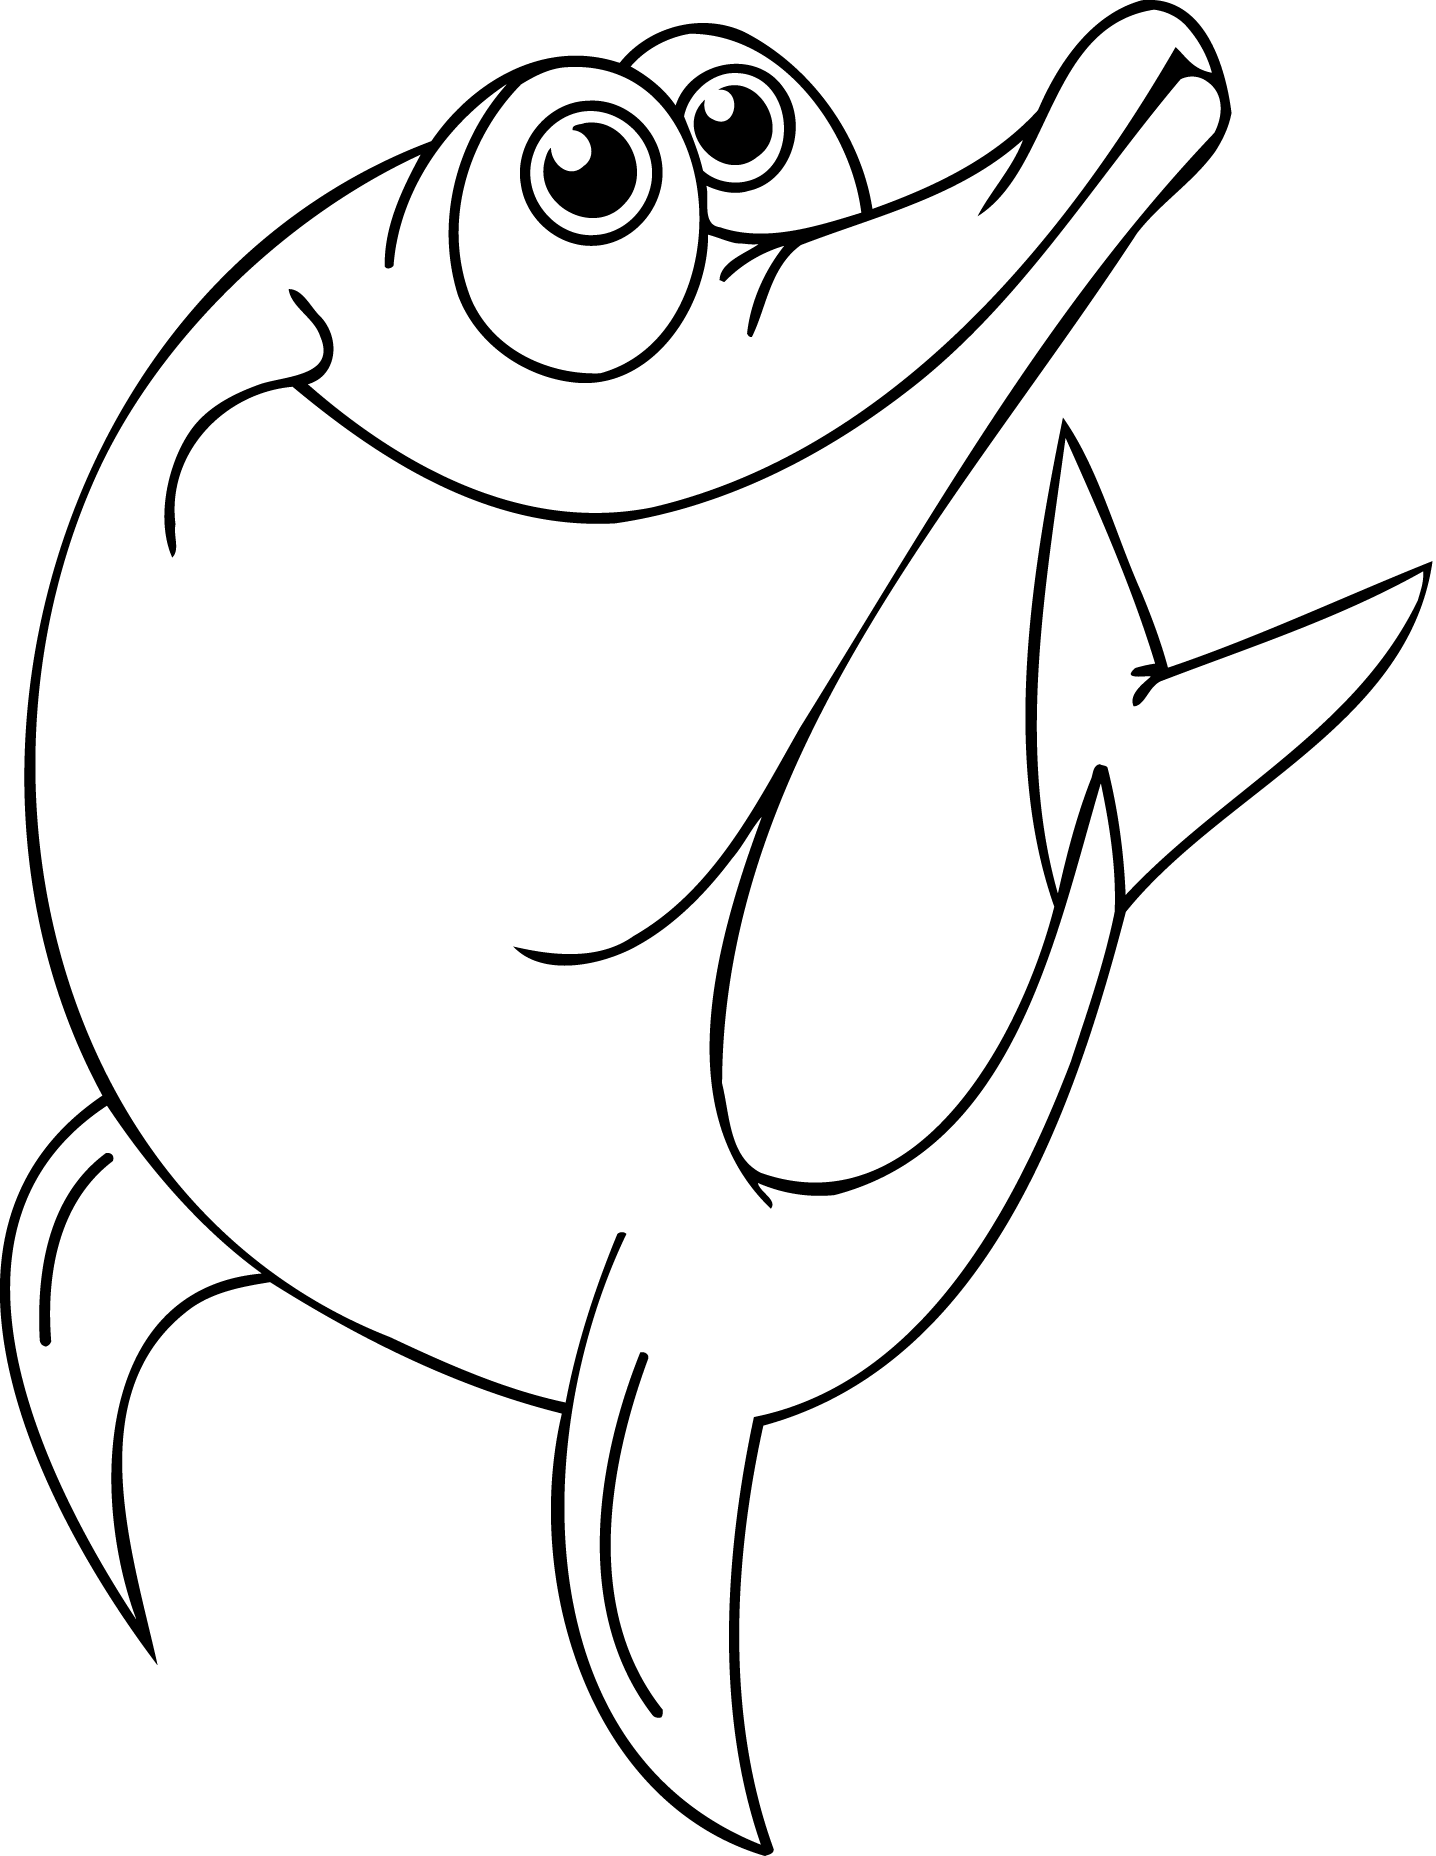 Printable Pictures Of Dolphins To Color | Animal Coloring Pages ...